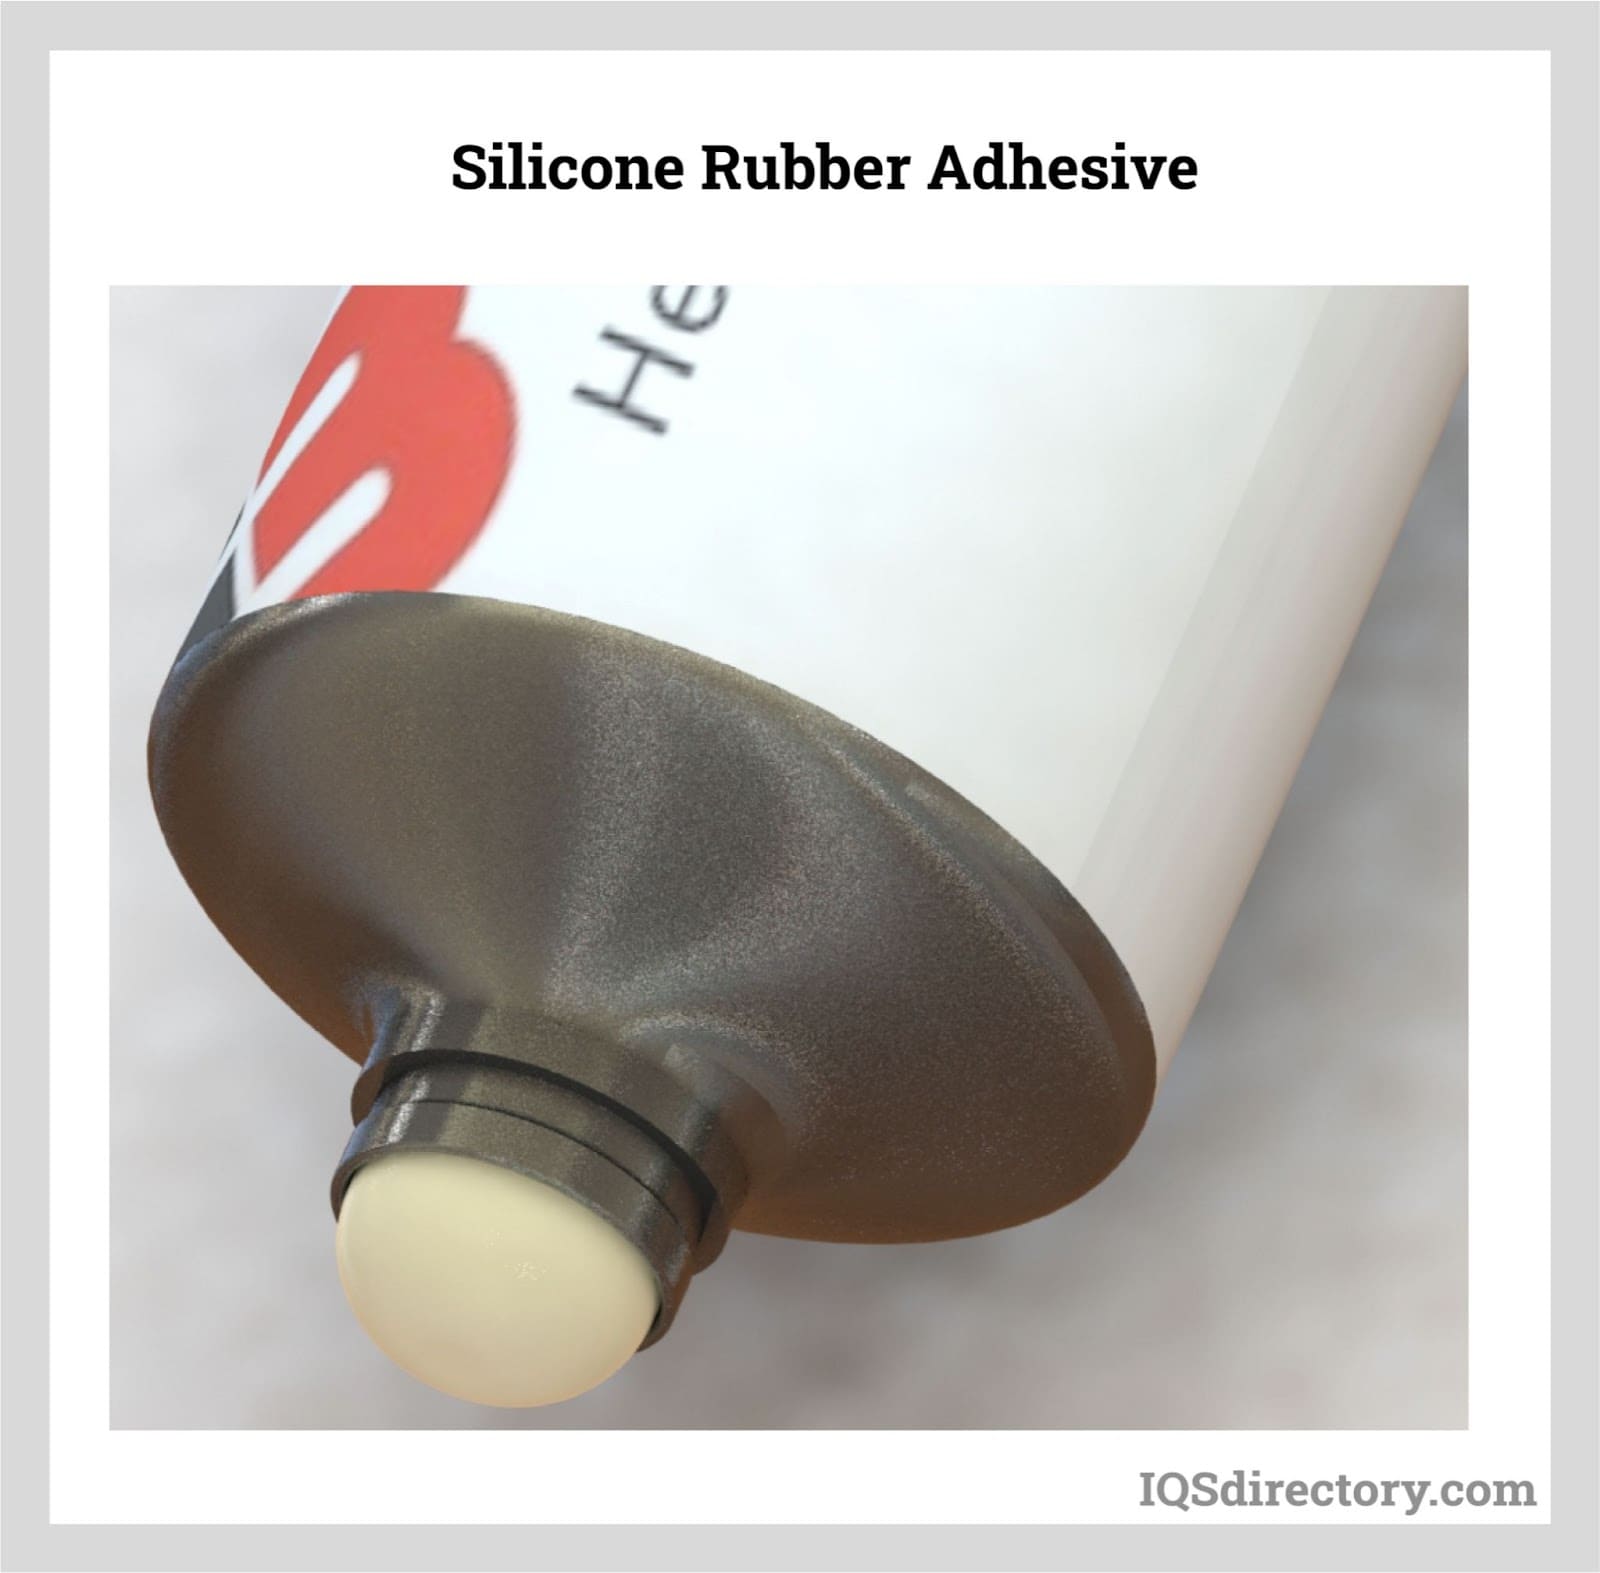 Silicone Adhesive: What Is It? How Does It Work? Types Of